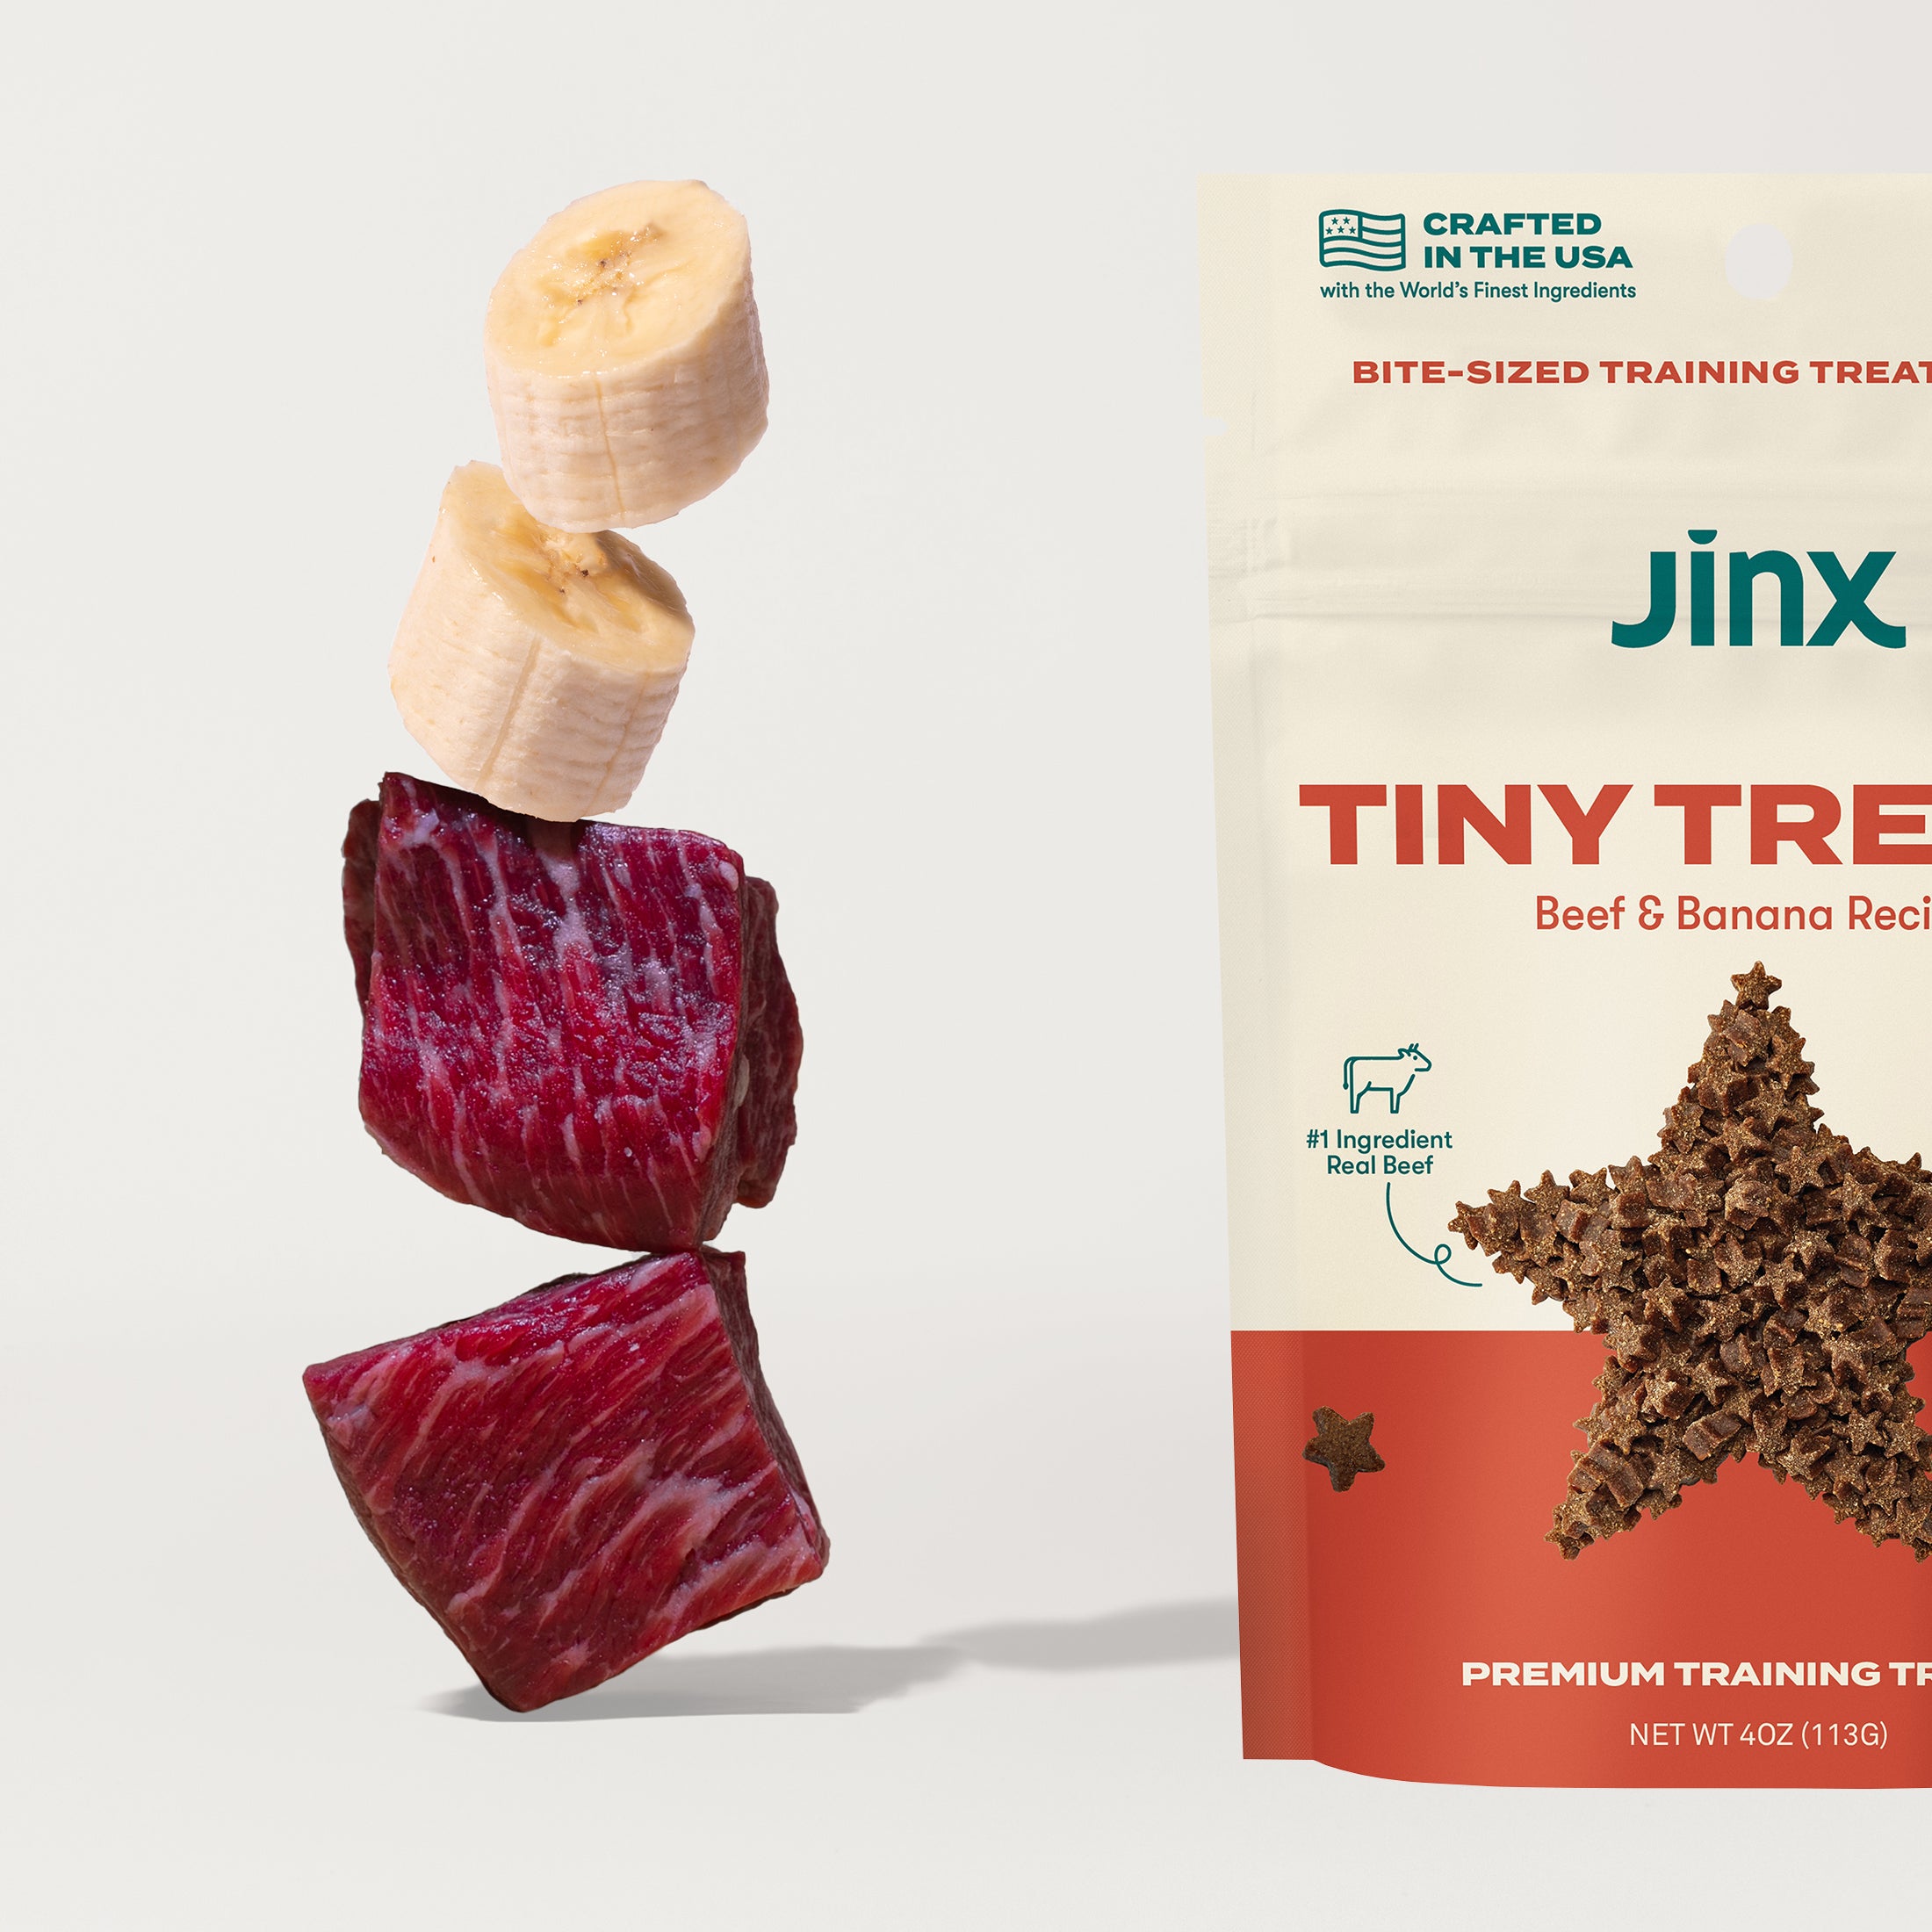 cubes of raw beef and chunks of banana stacked on the left and image of jinx beef tiny treats packaging to the right